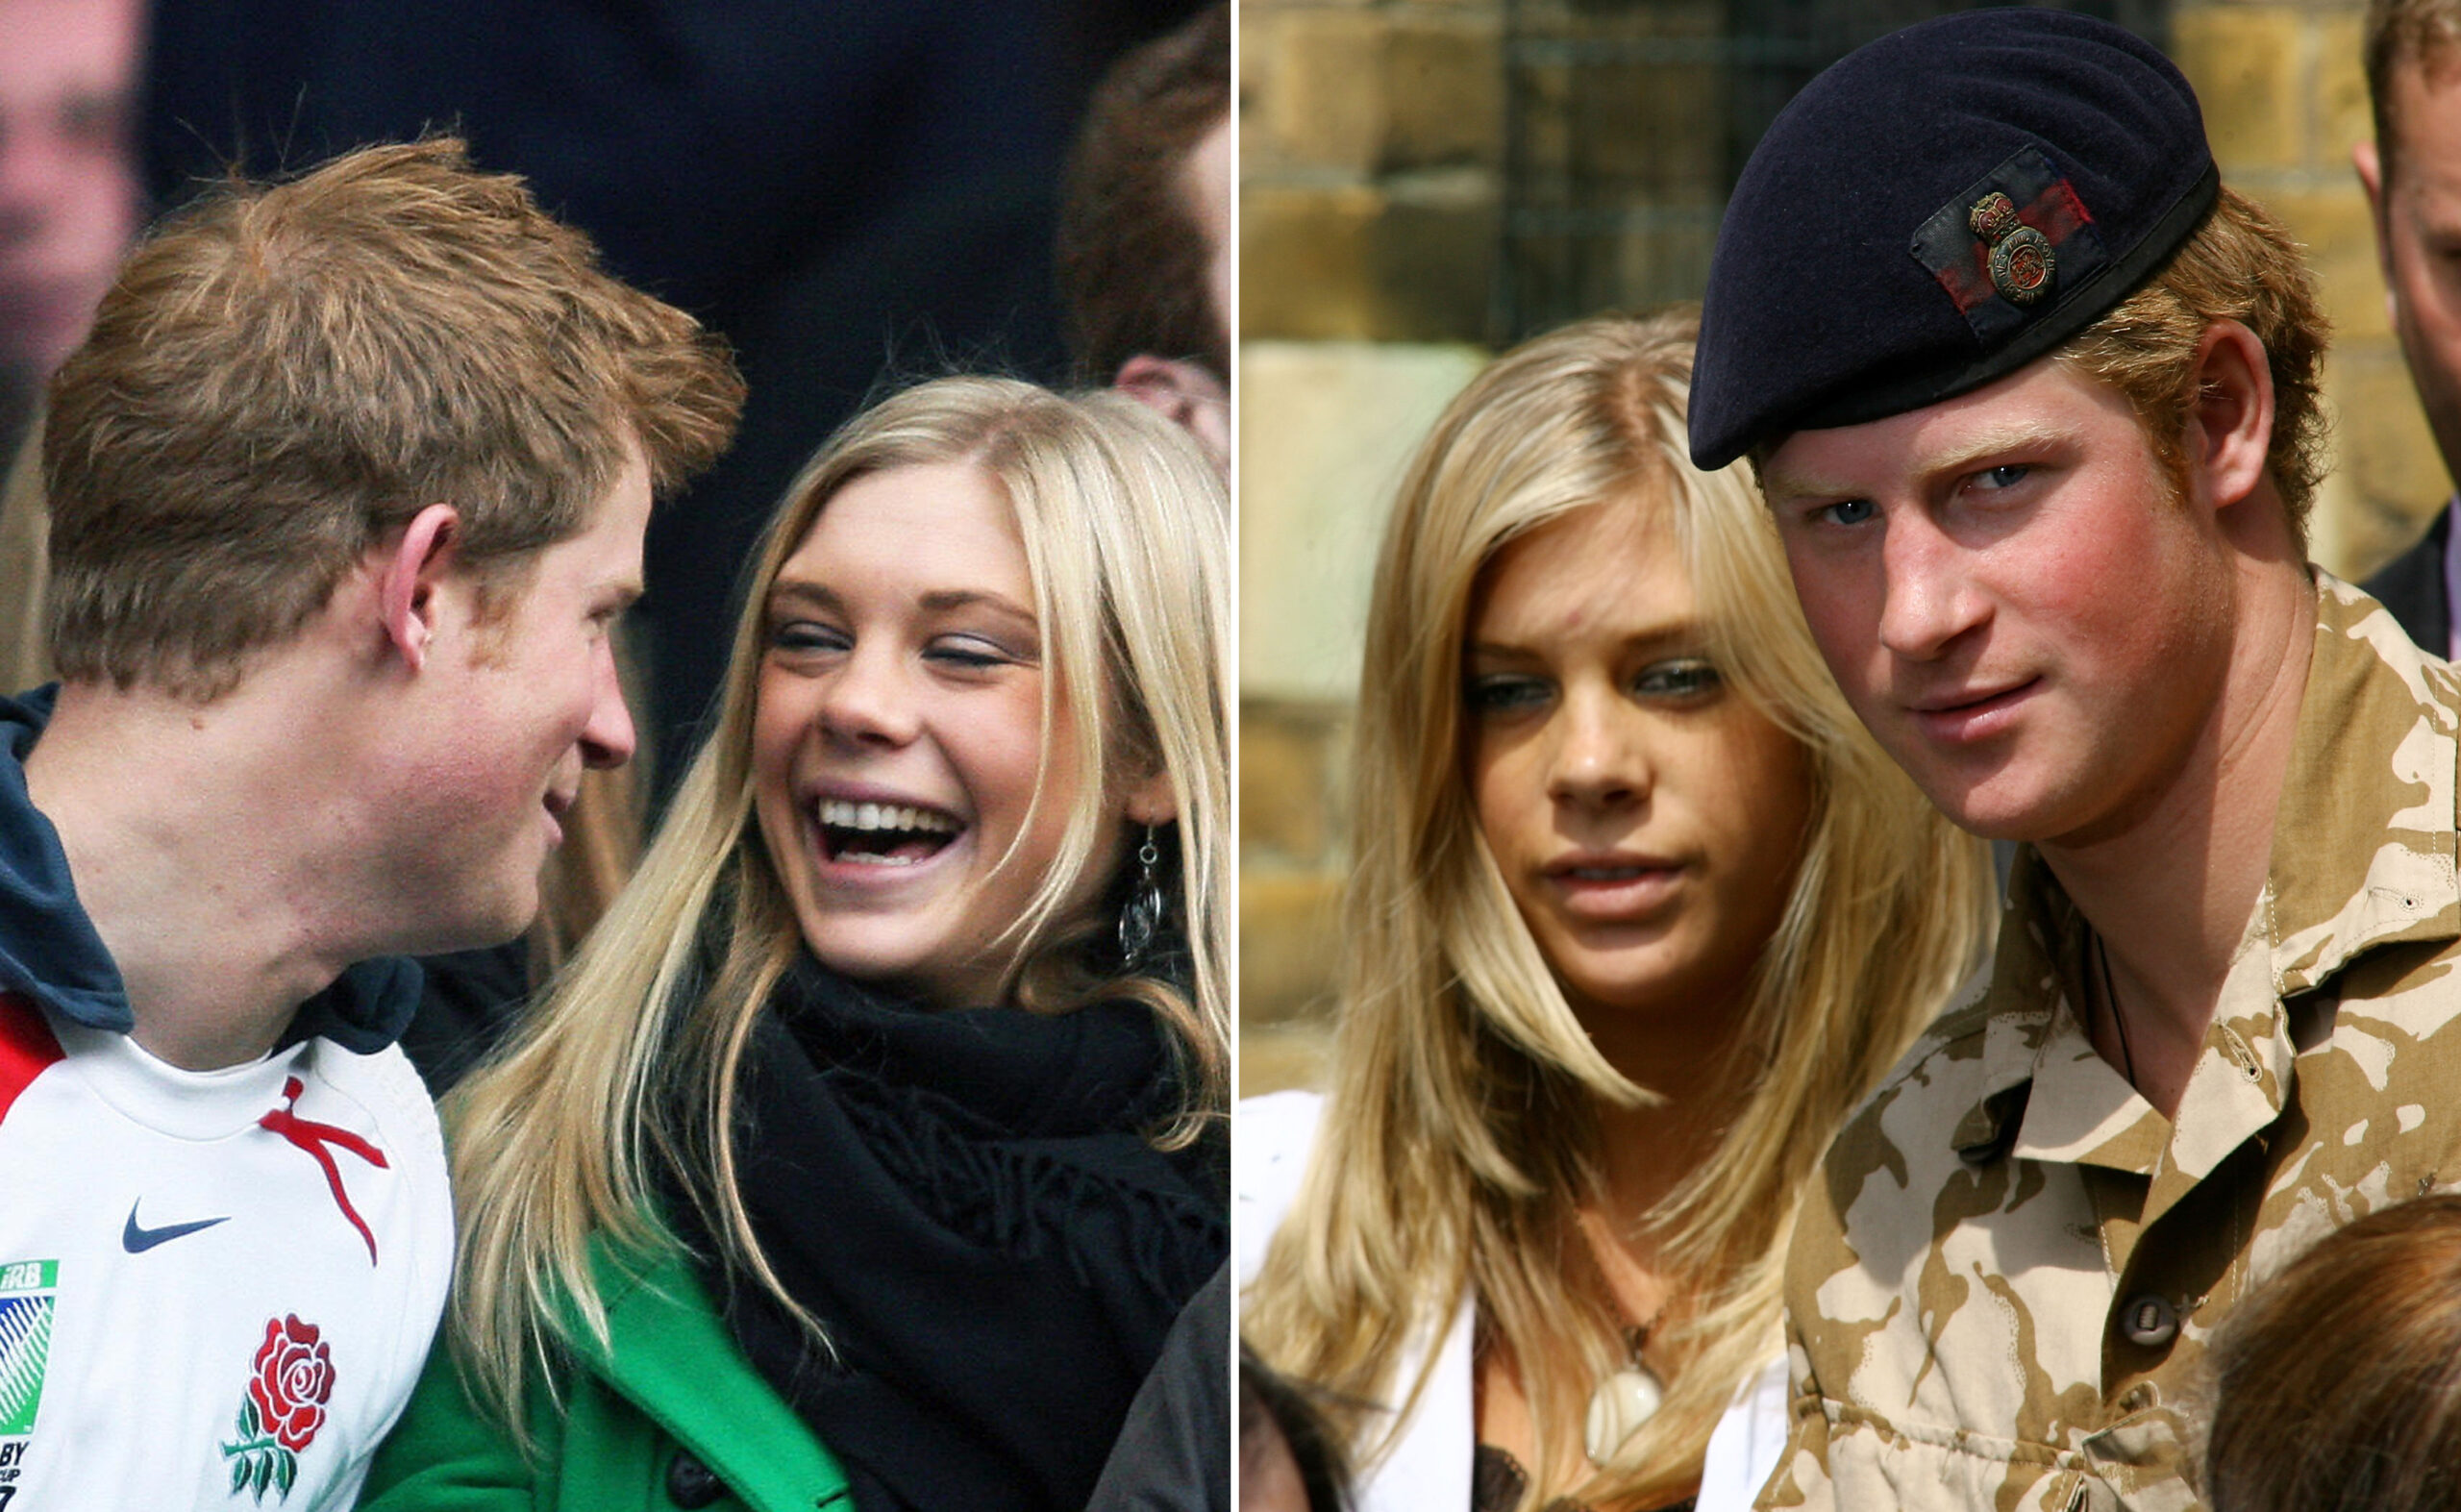 “It was so full-on”: Prince William and Prince Harry’s ex-girlfriends explain what it’s really like to date a royal